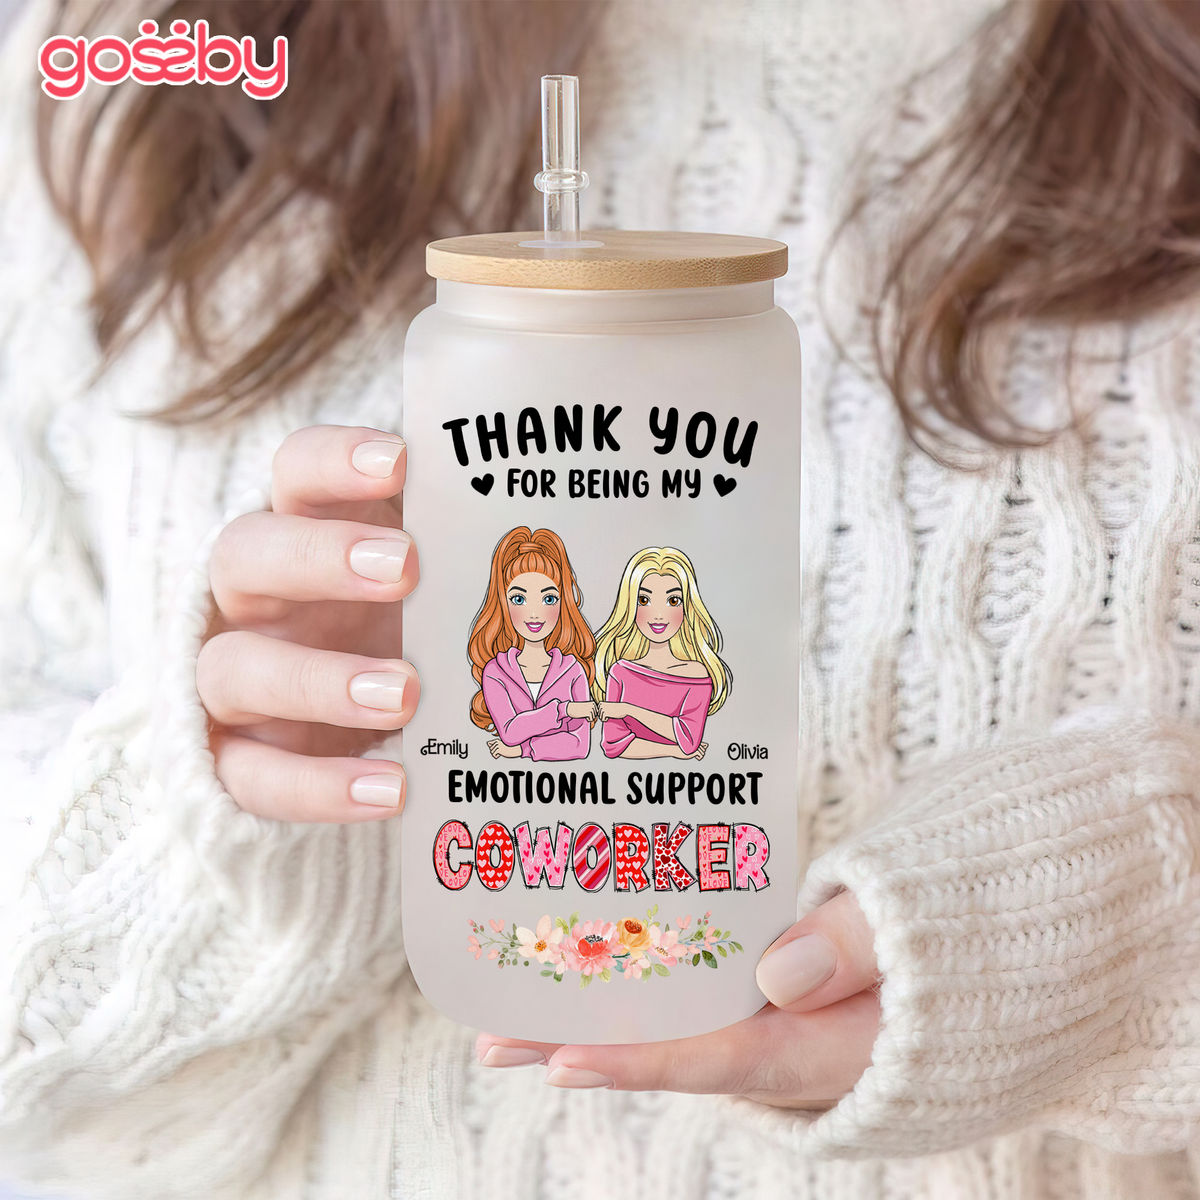 Personalized Tumbler - Glass tumbler - Thank you for being my emotional support coworker - Bestie Personalized Custom Glass tumbler - Gift For Best Friends, BFF, Sisters, Coworkers_2